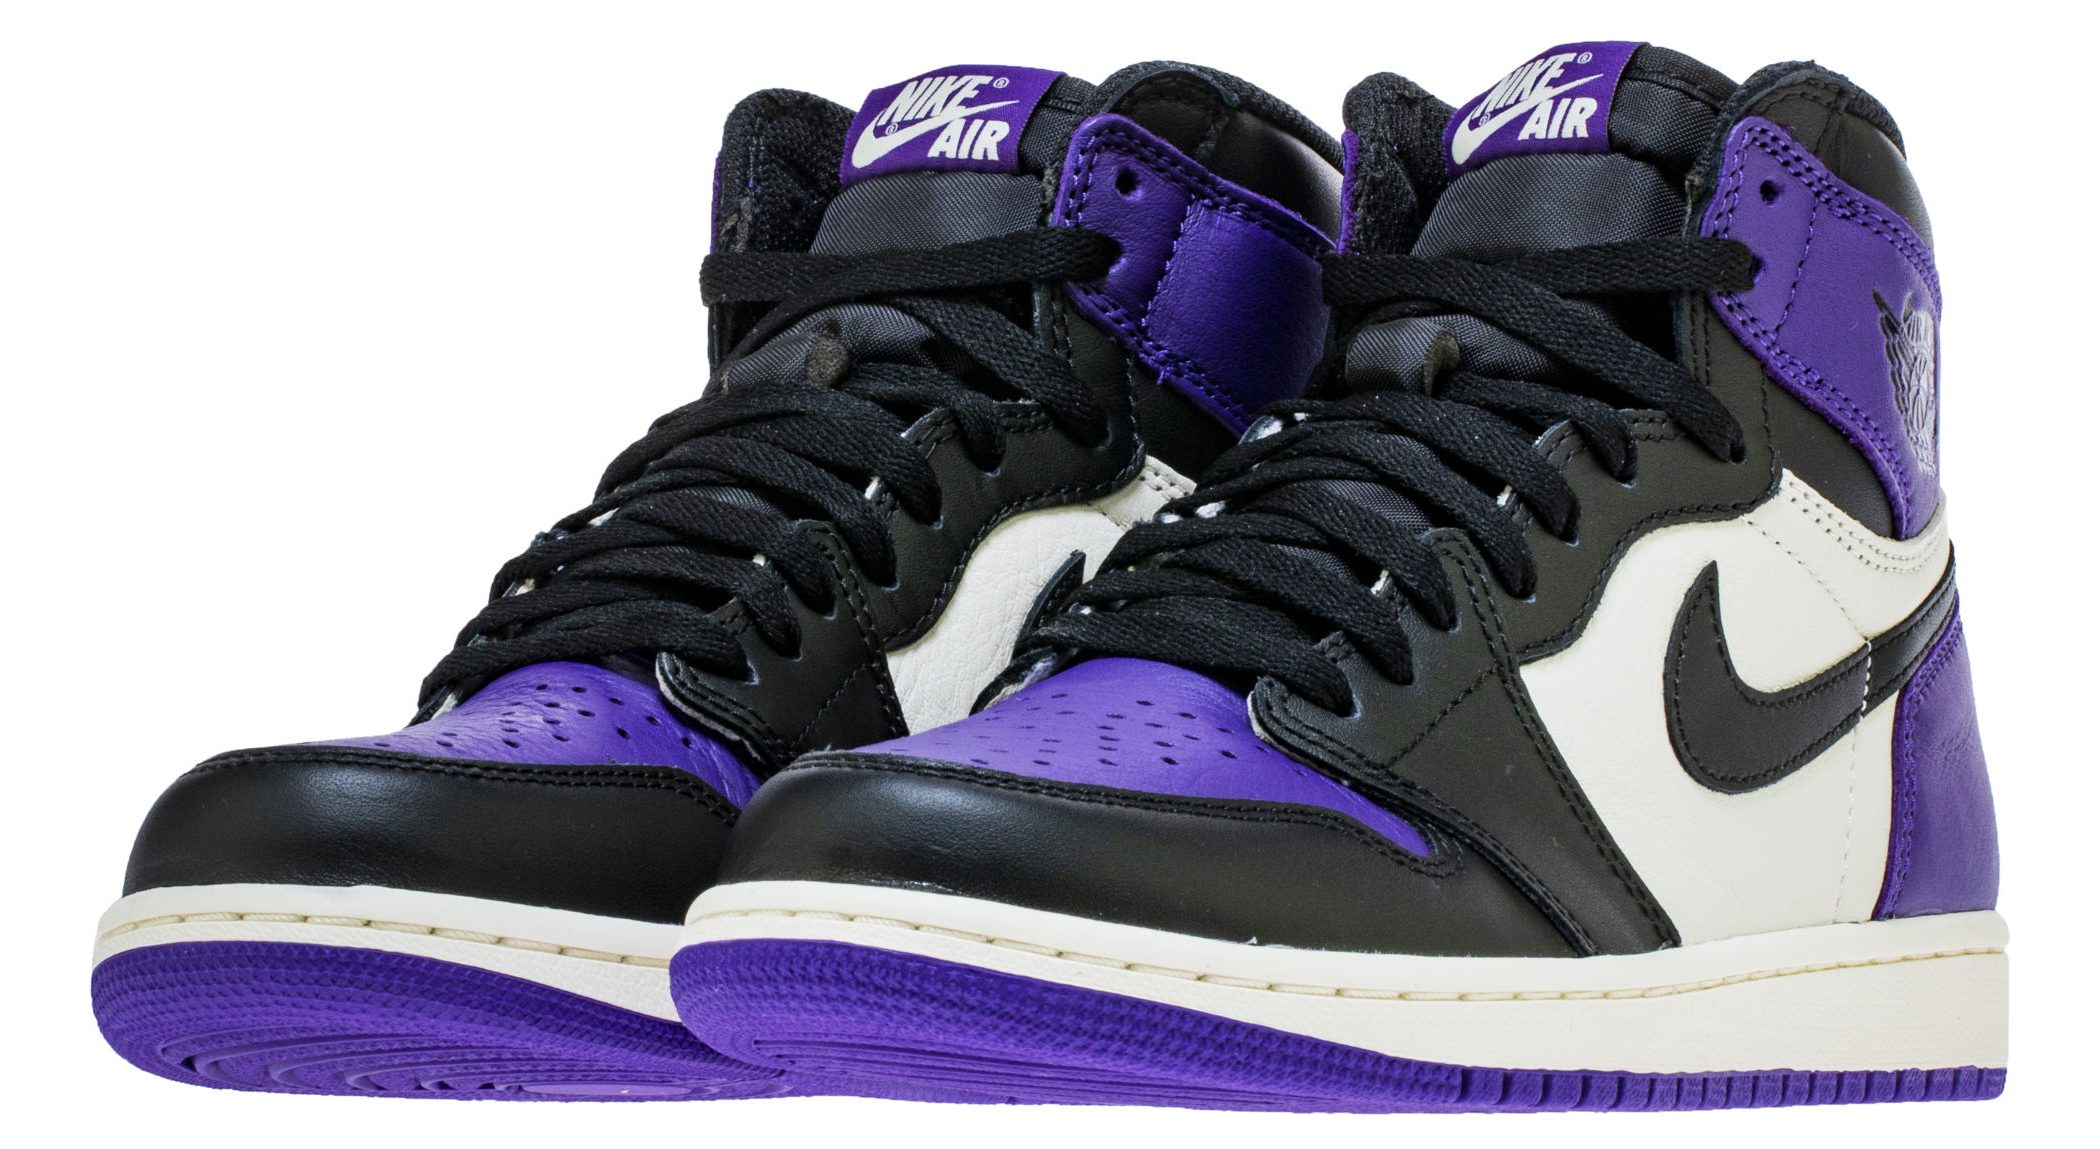 Official Images of the Air Jordan 1 'Court Purple' Reveal GS